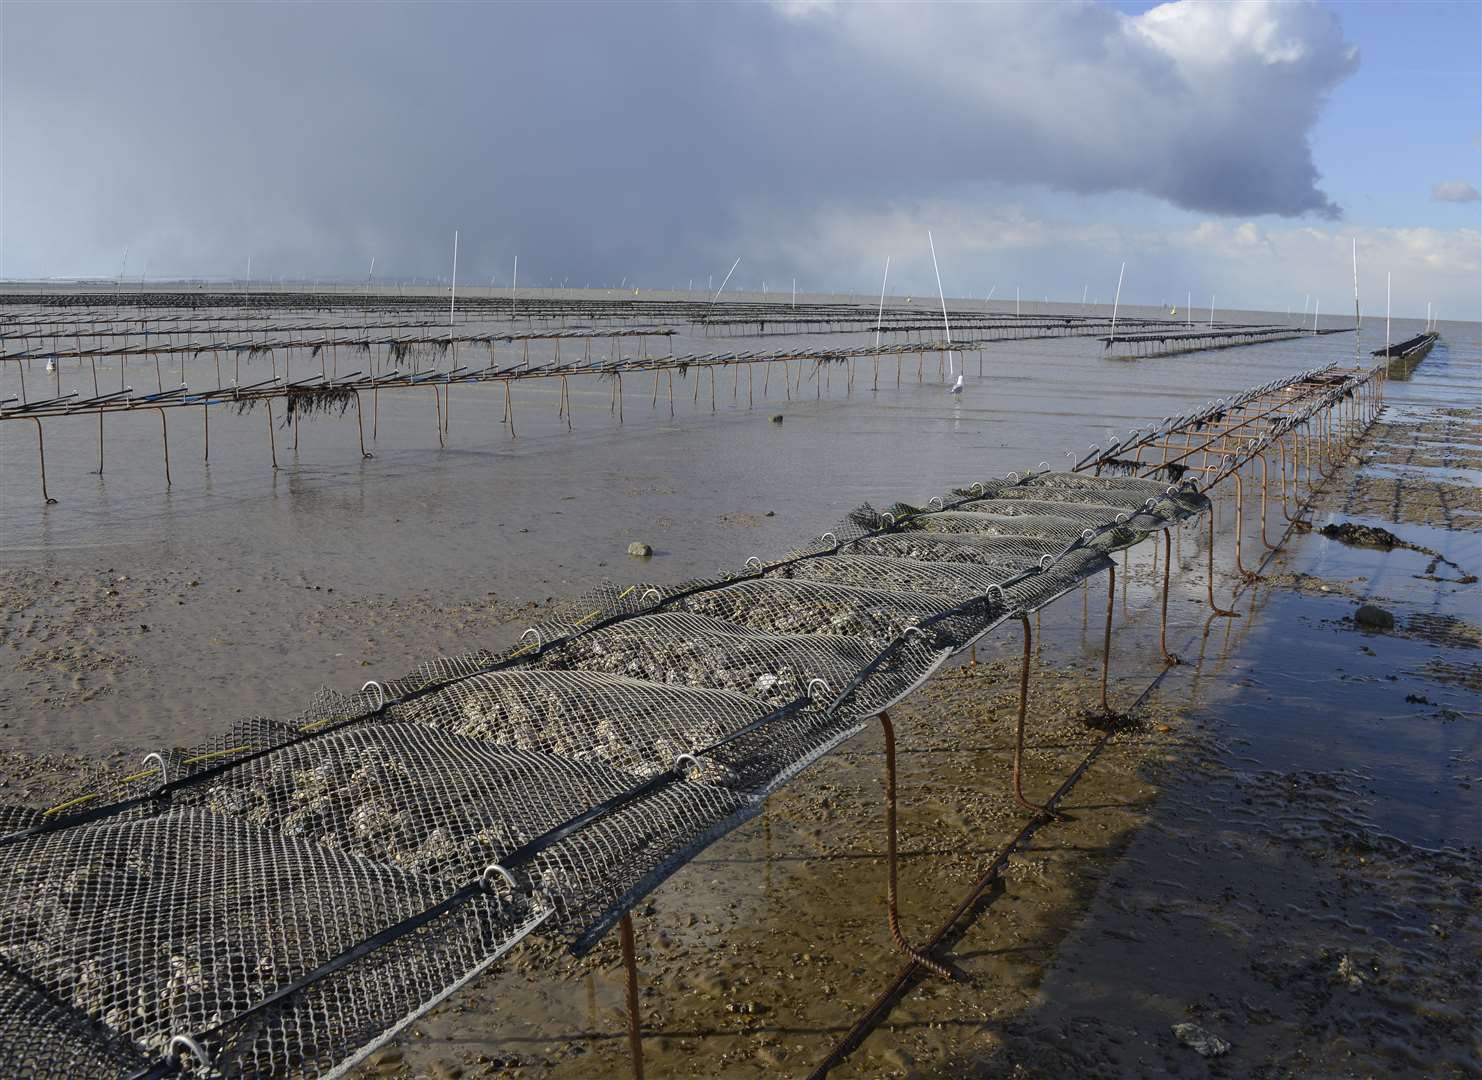 Campaigners have long raised concerns about the safety of the metal trestles used to harvest oysters in Whitstable